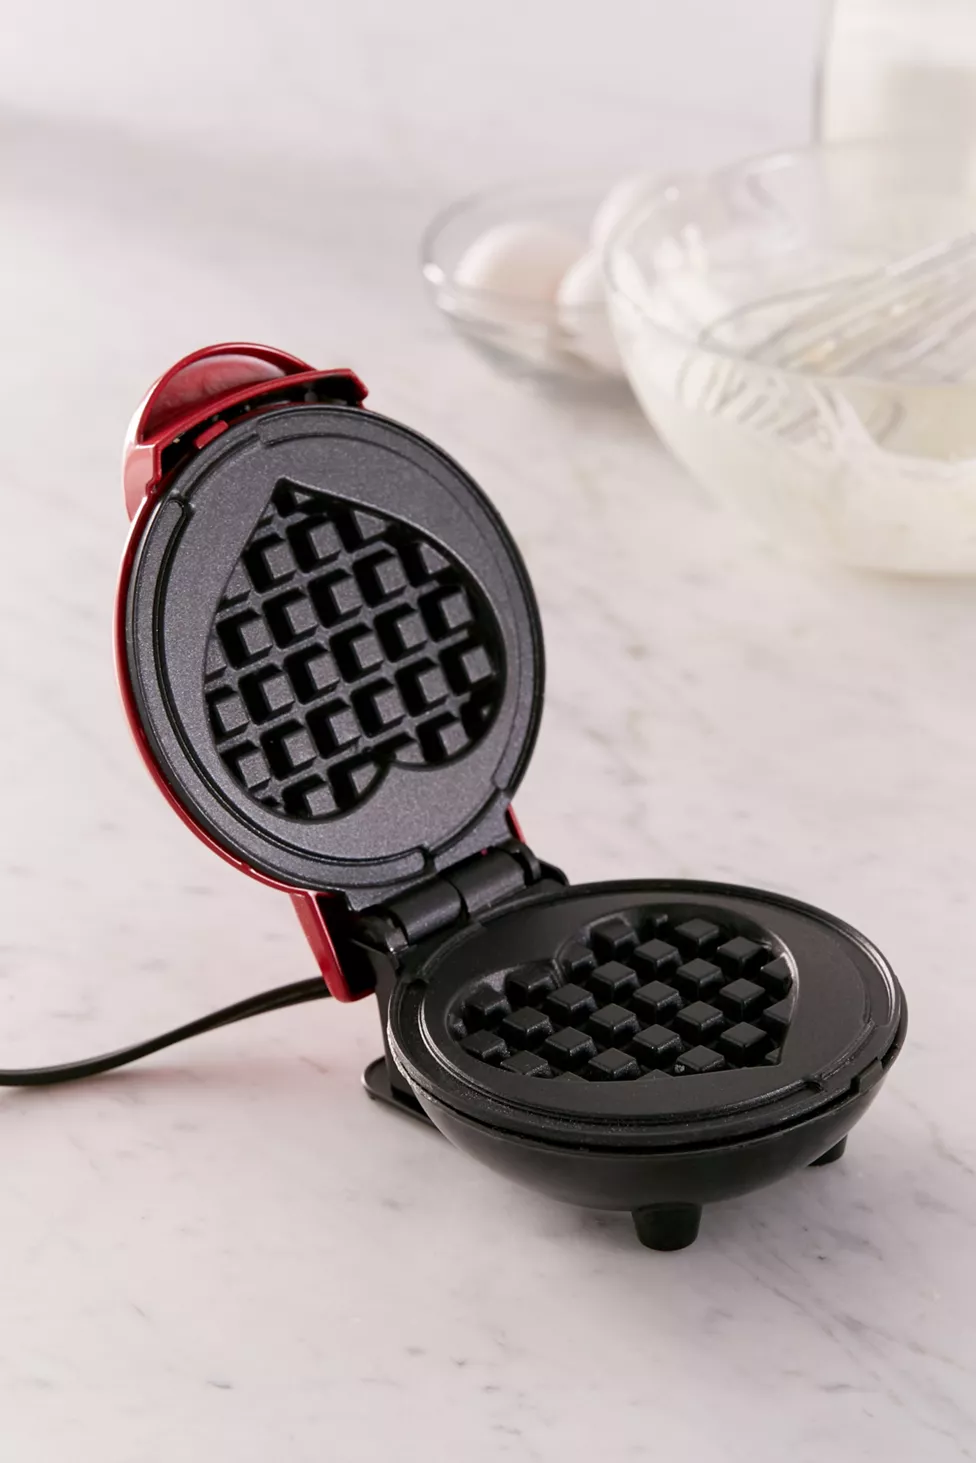 Waffle maker from urban outfitters